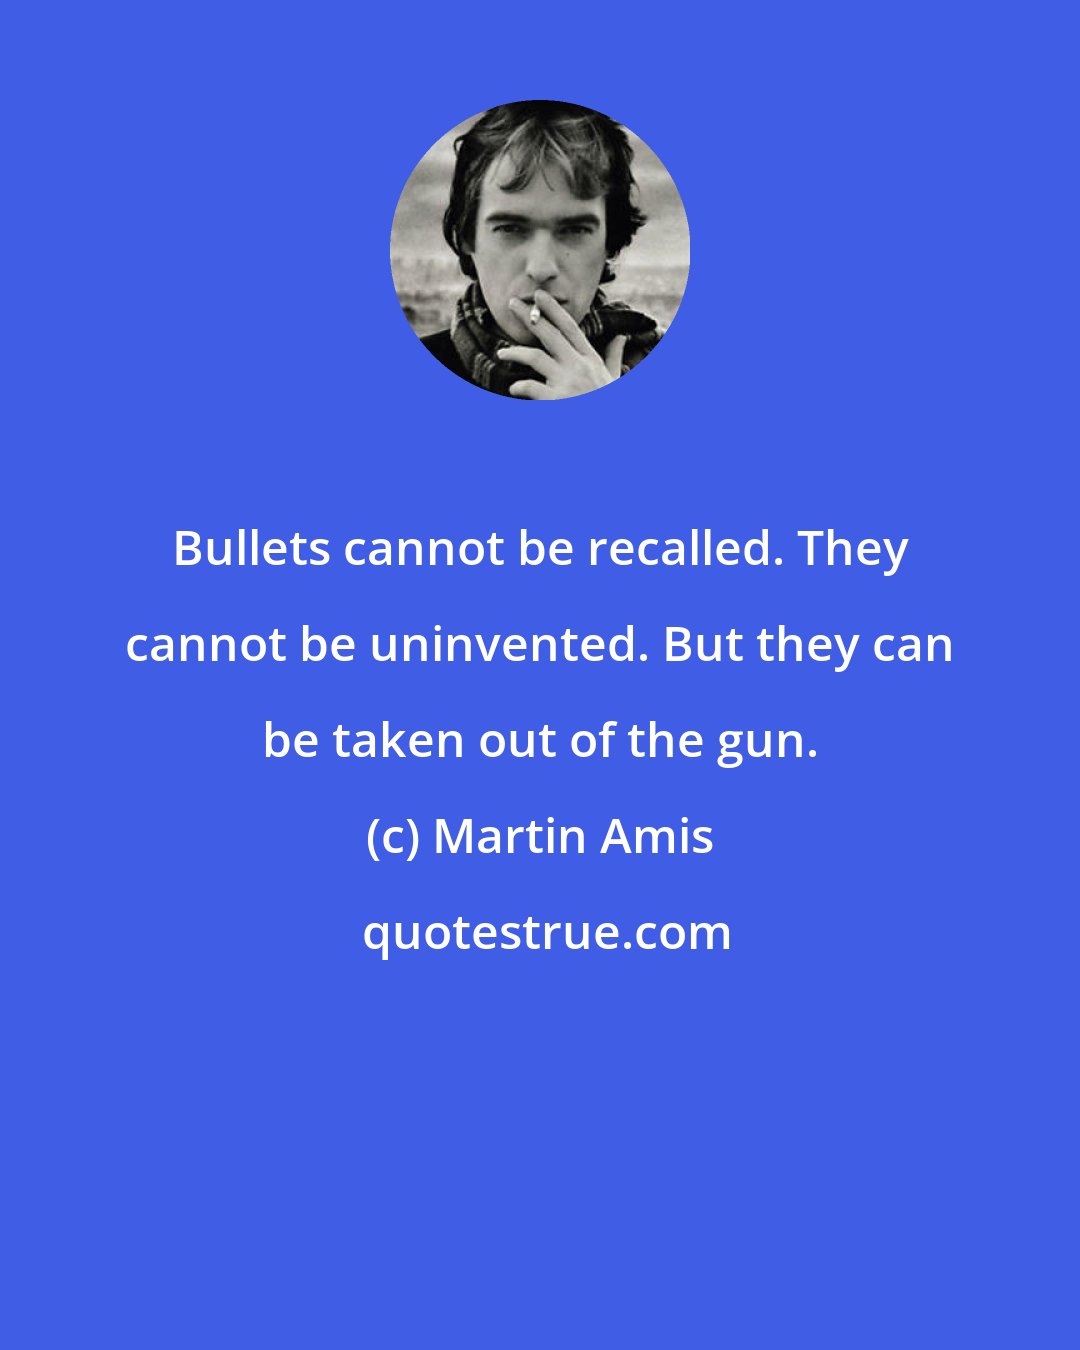 Martin Amis: Bullets cannot be recalled. They cannot be uninvented. But they can be taken out of the gun.